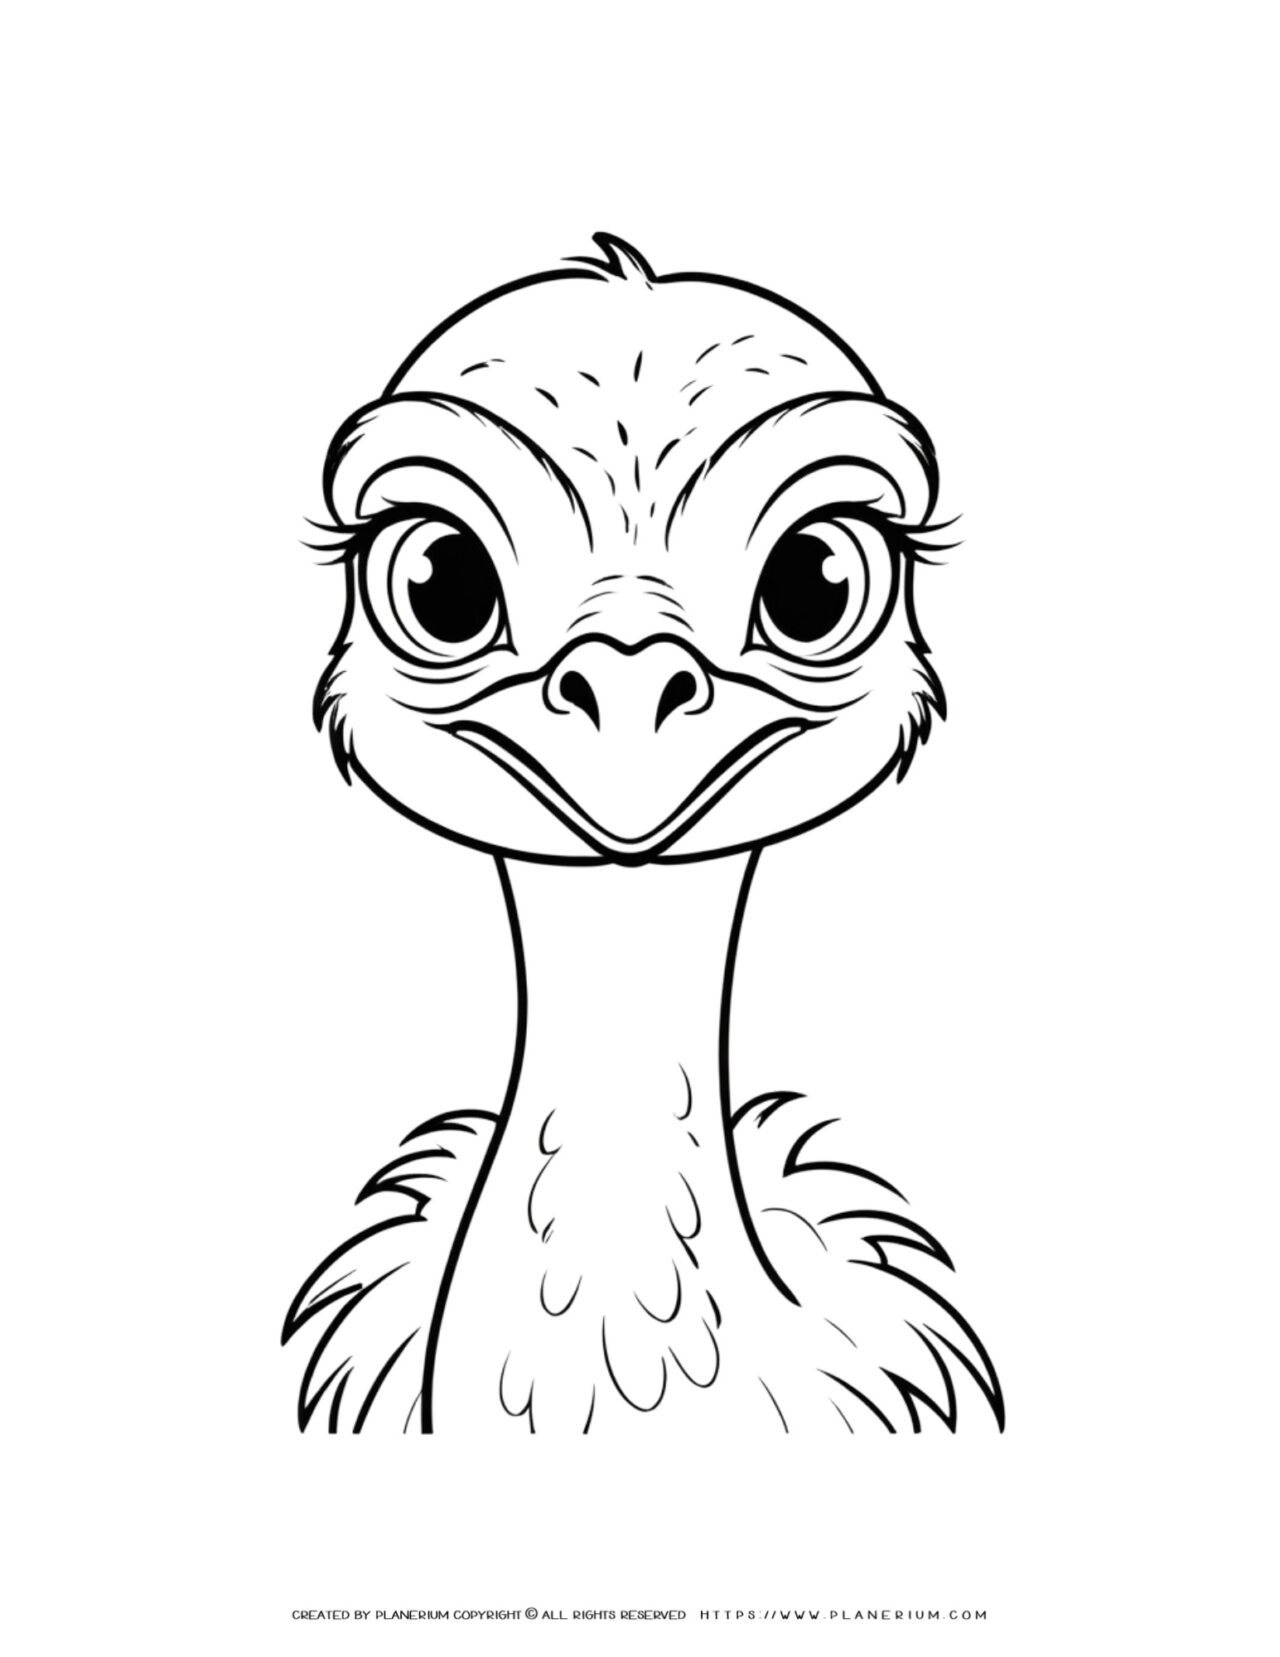 ostrich-face-front-view-outline-comic-style-coloring-page-for-kids